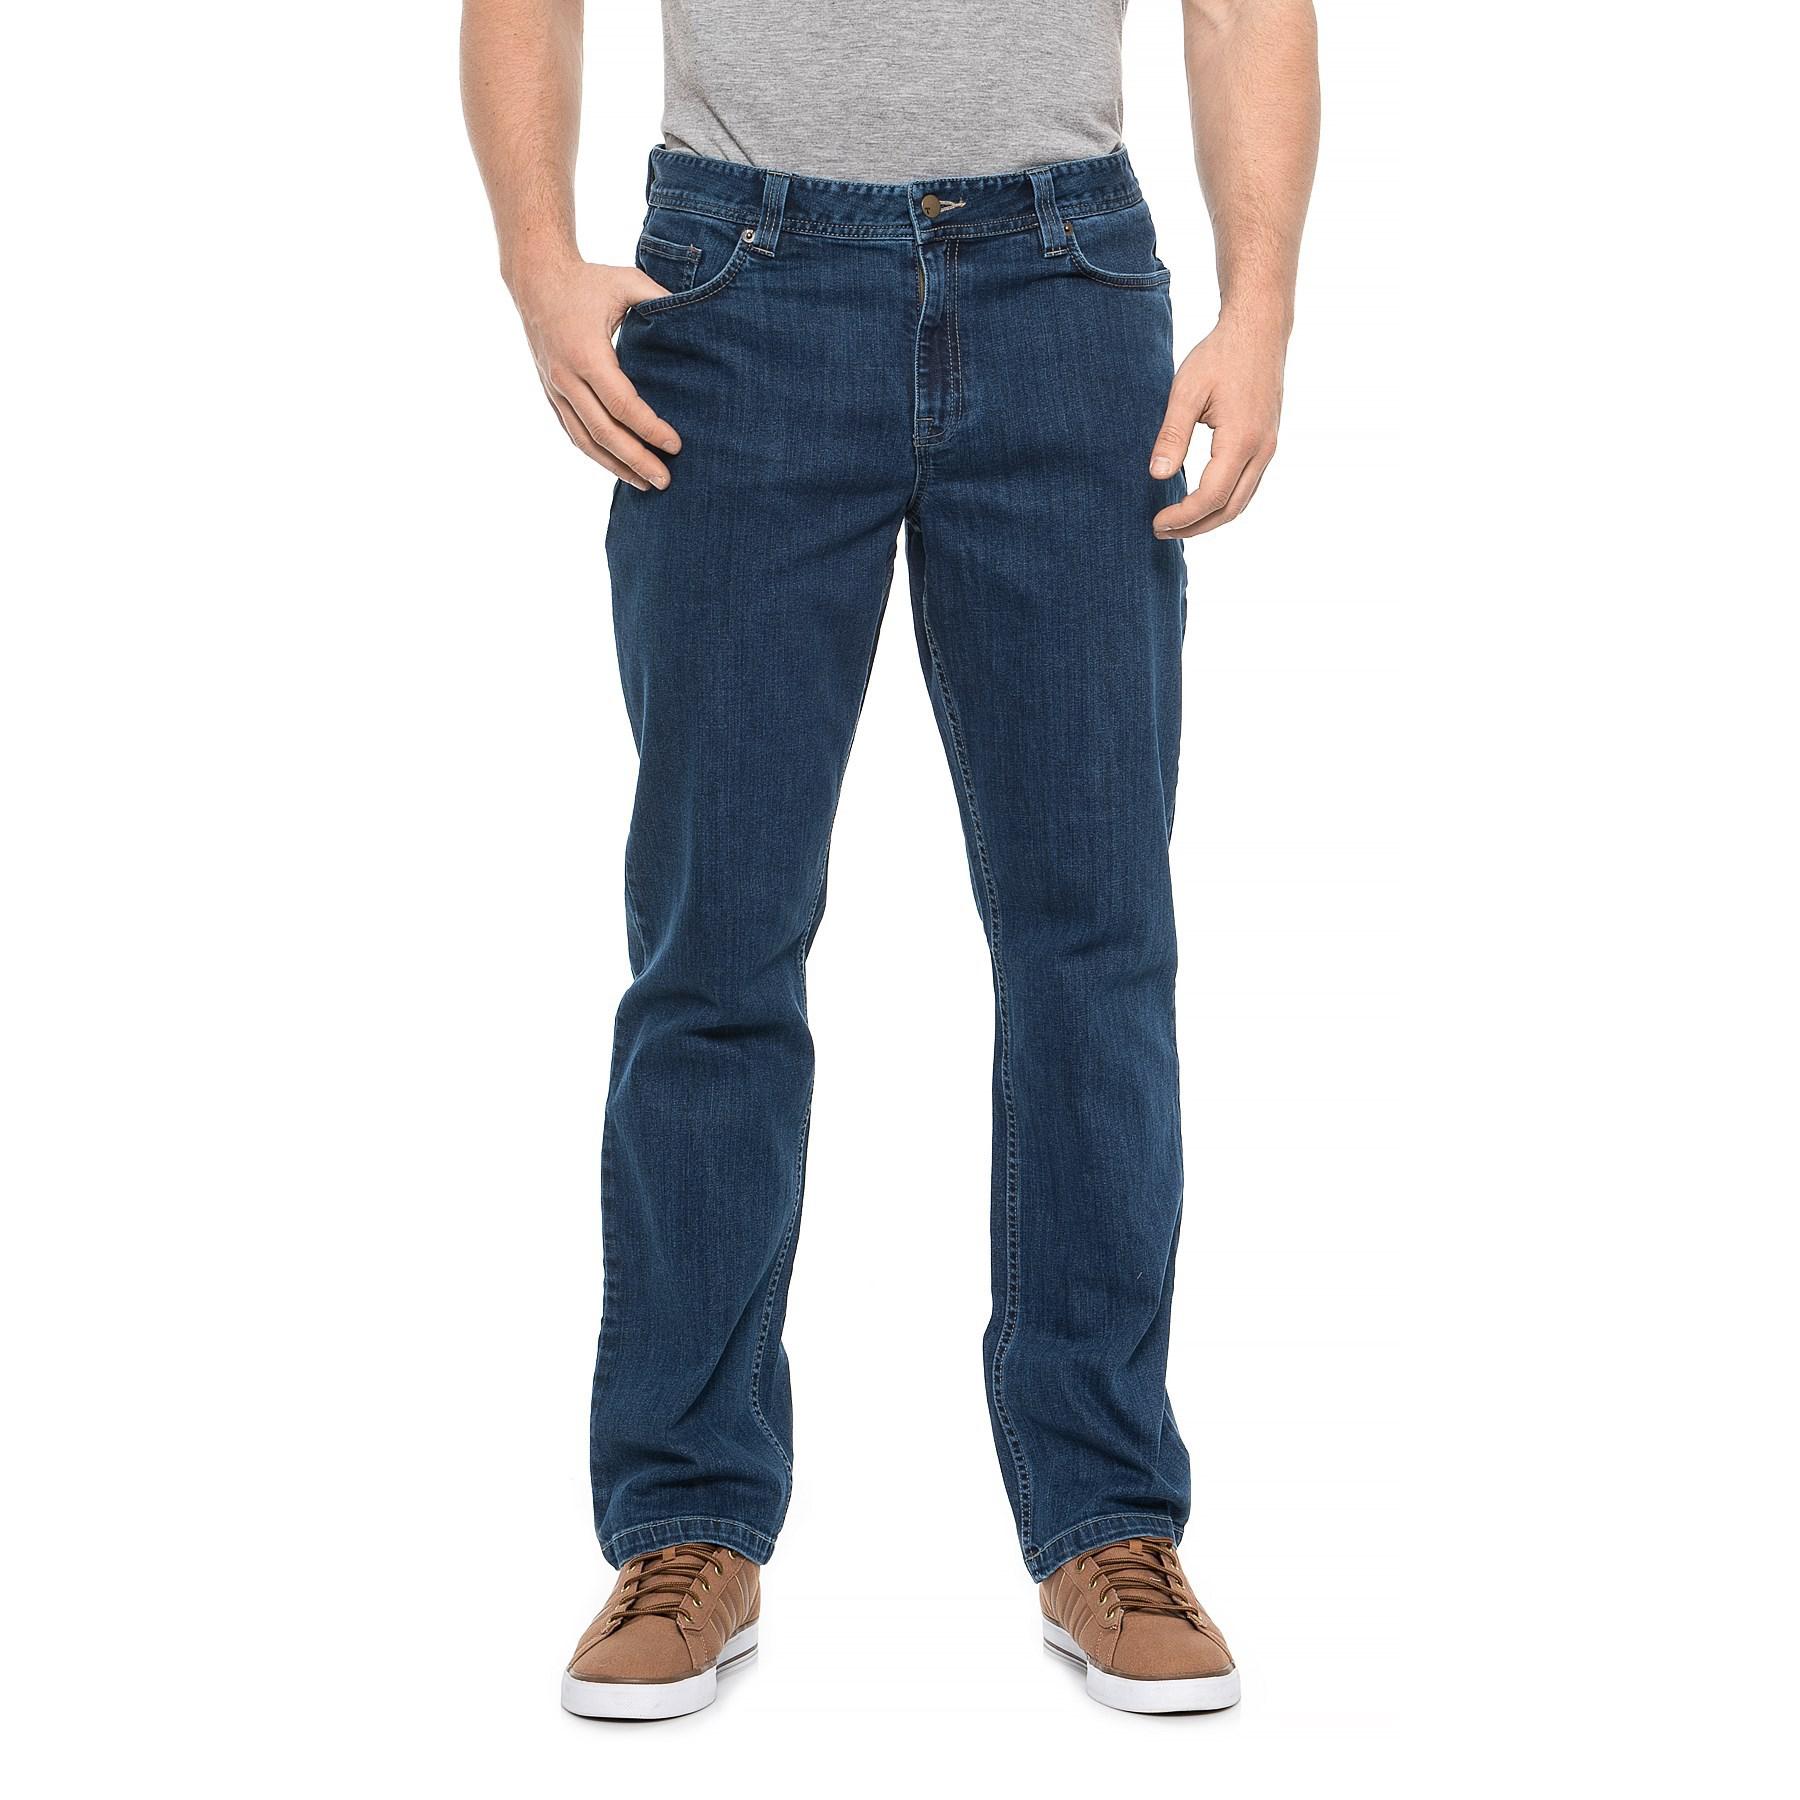 drover jeans